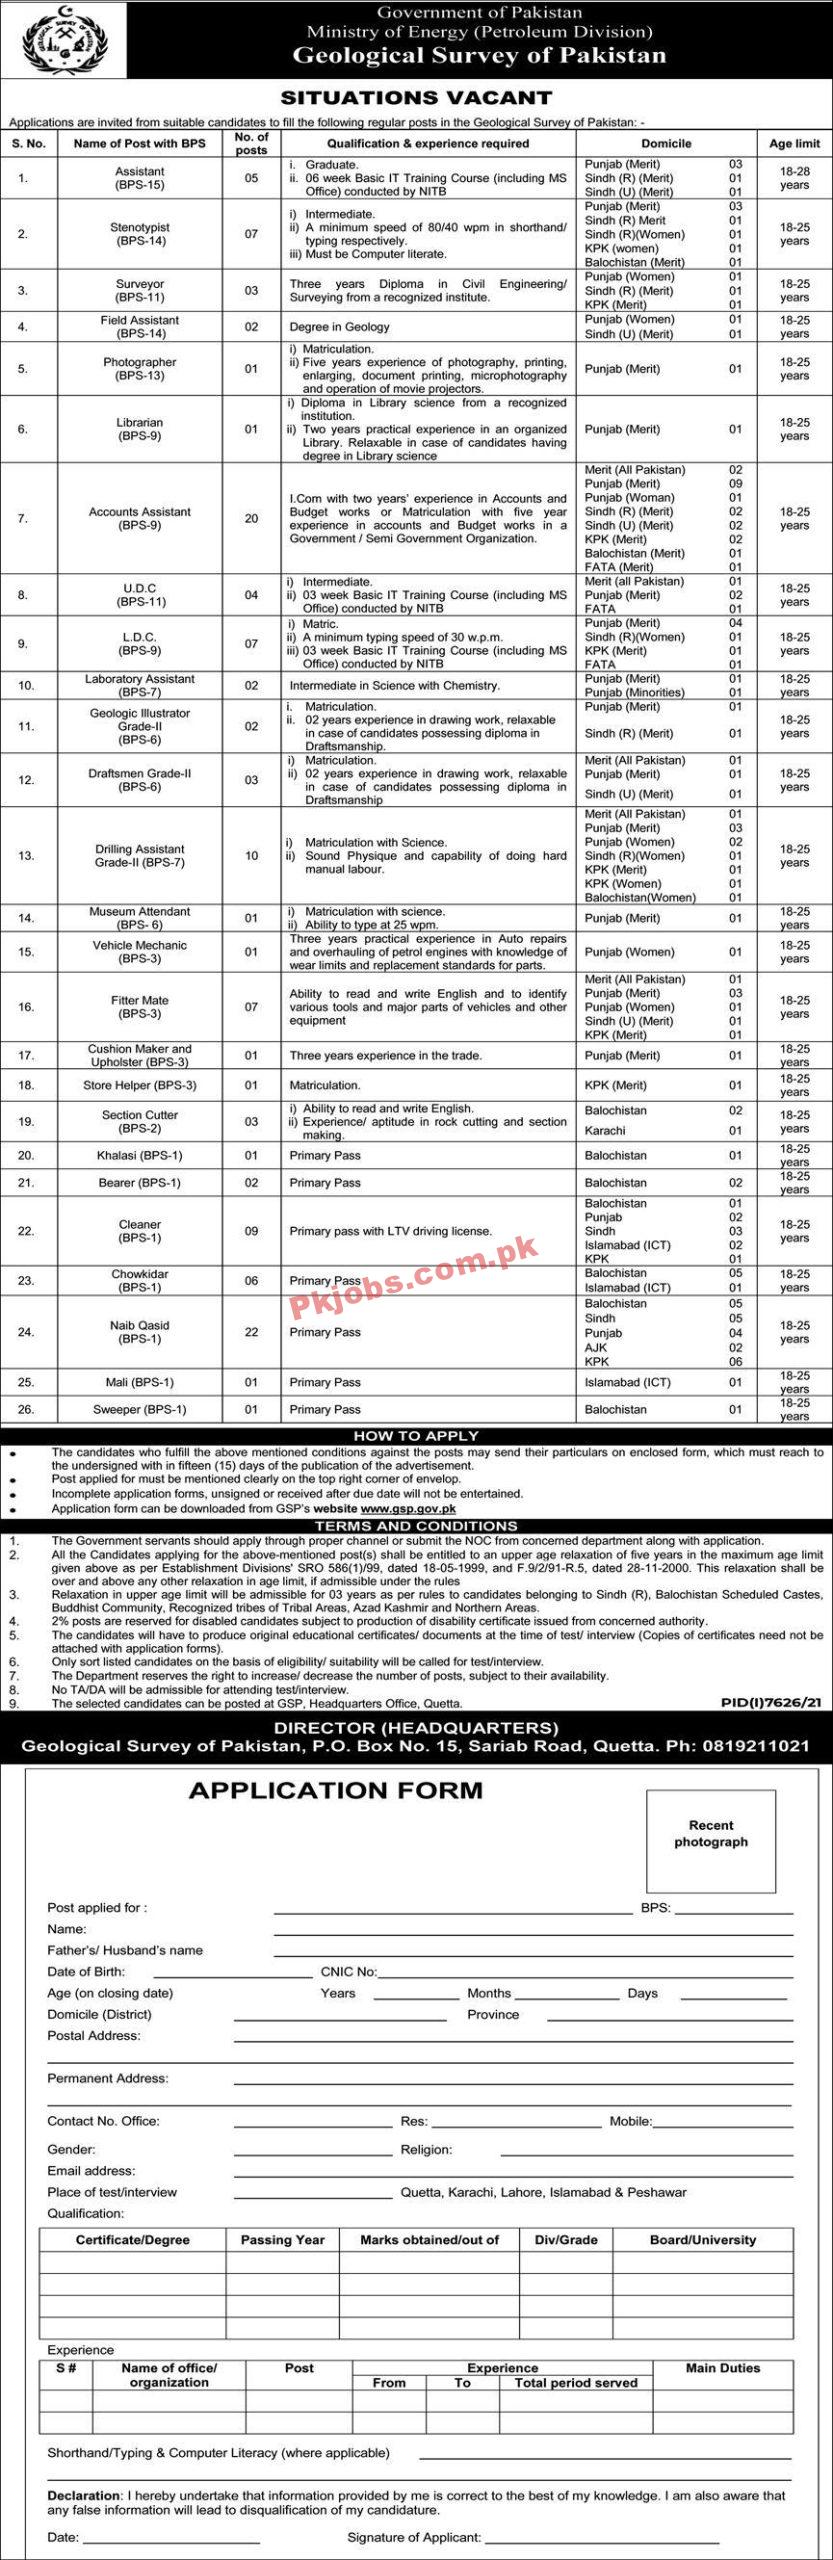 GSP Jobs 2022 | Geological Survey of Pakistan GSP Headquarters Announced Latest Recruitments Jobs 2022